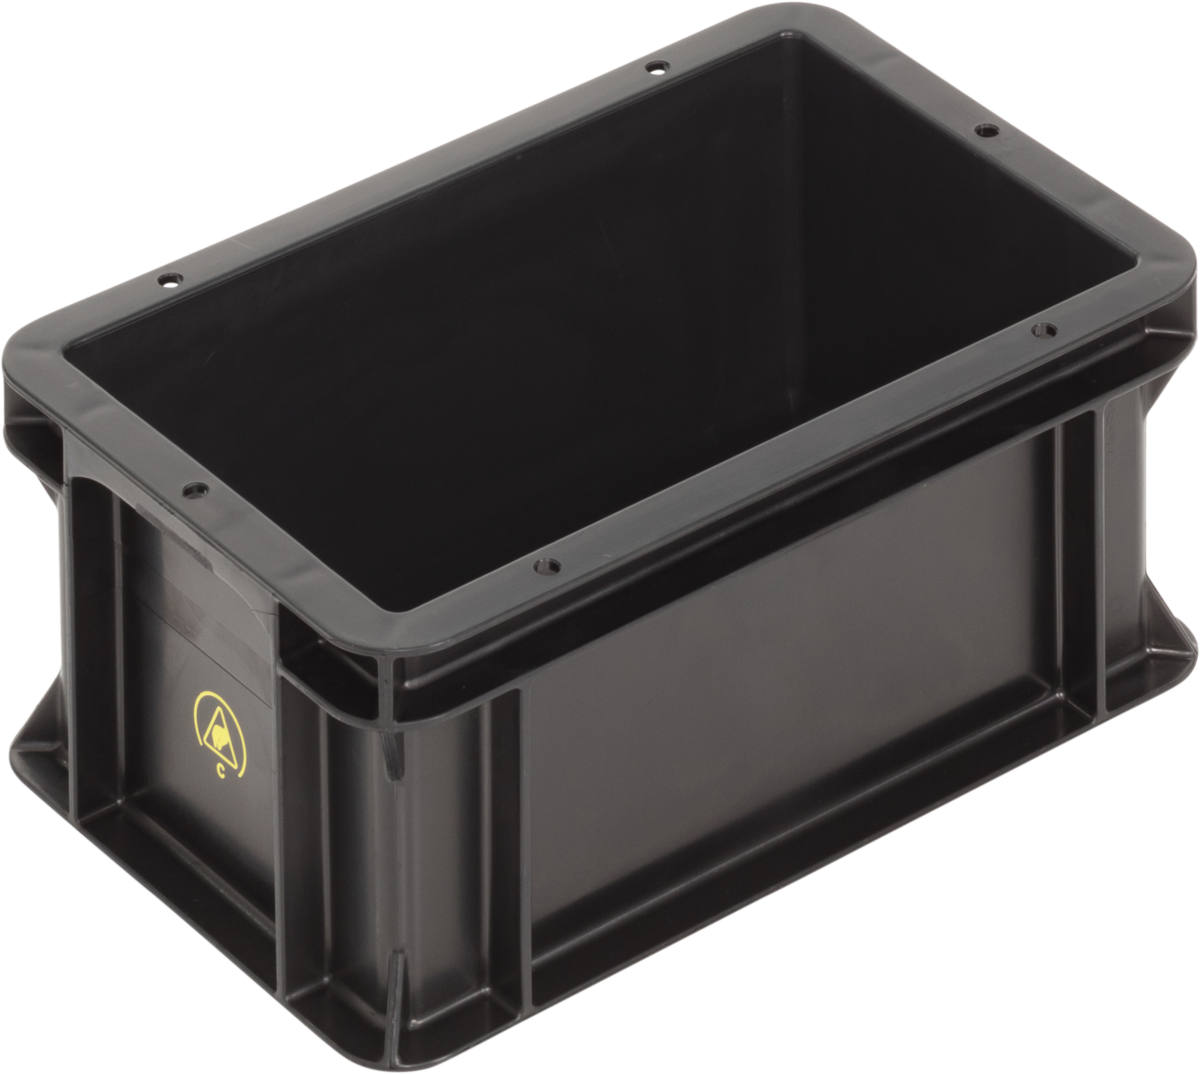 ESD-Safe-SGL-Norm-Stacking-Bin-Containers-Flat-Base-Ref.-3213.007.992_1004266_300x200x145_01